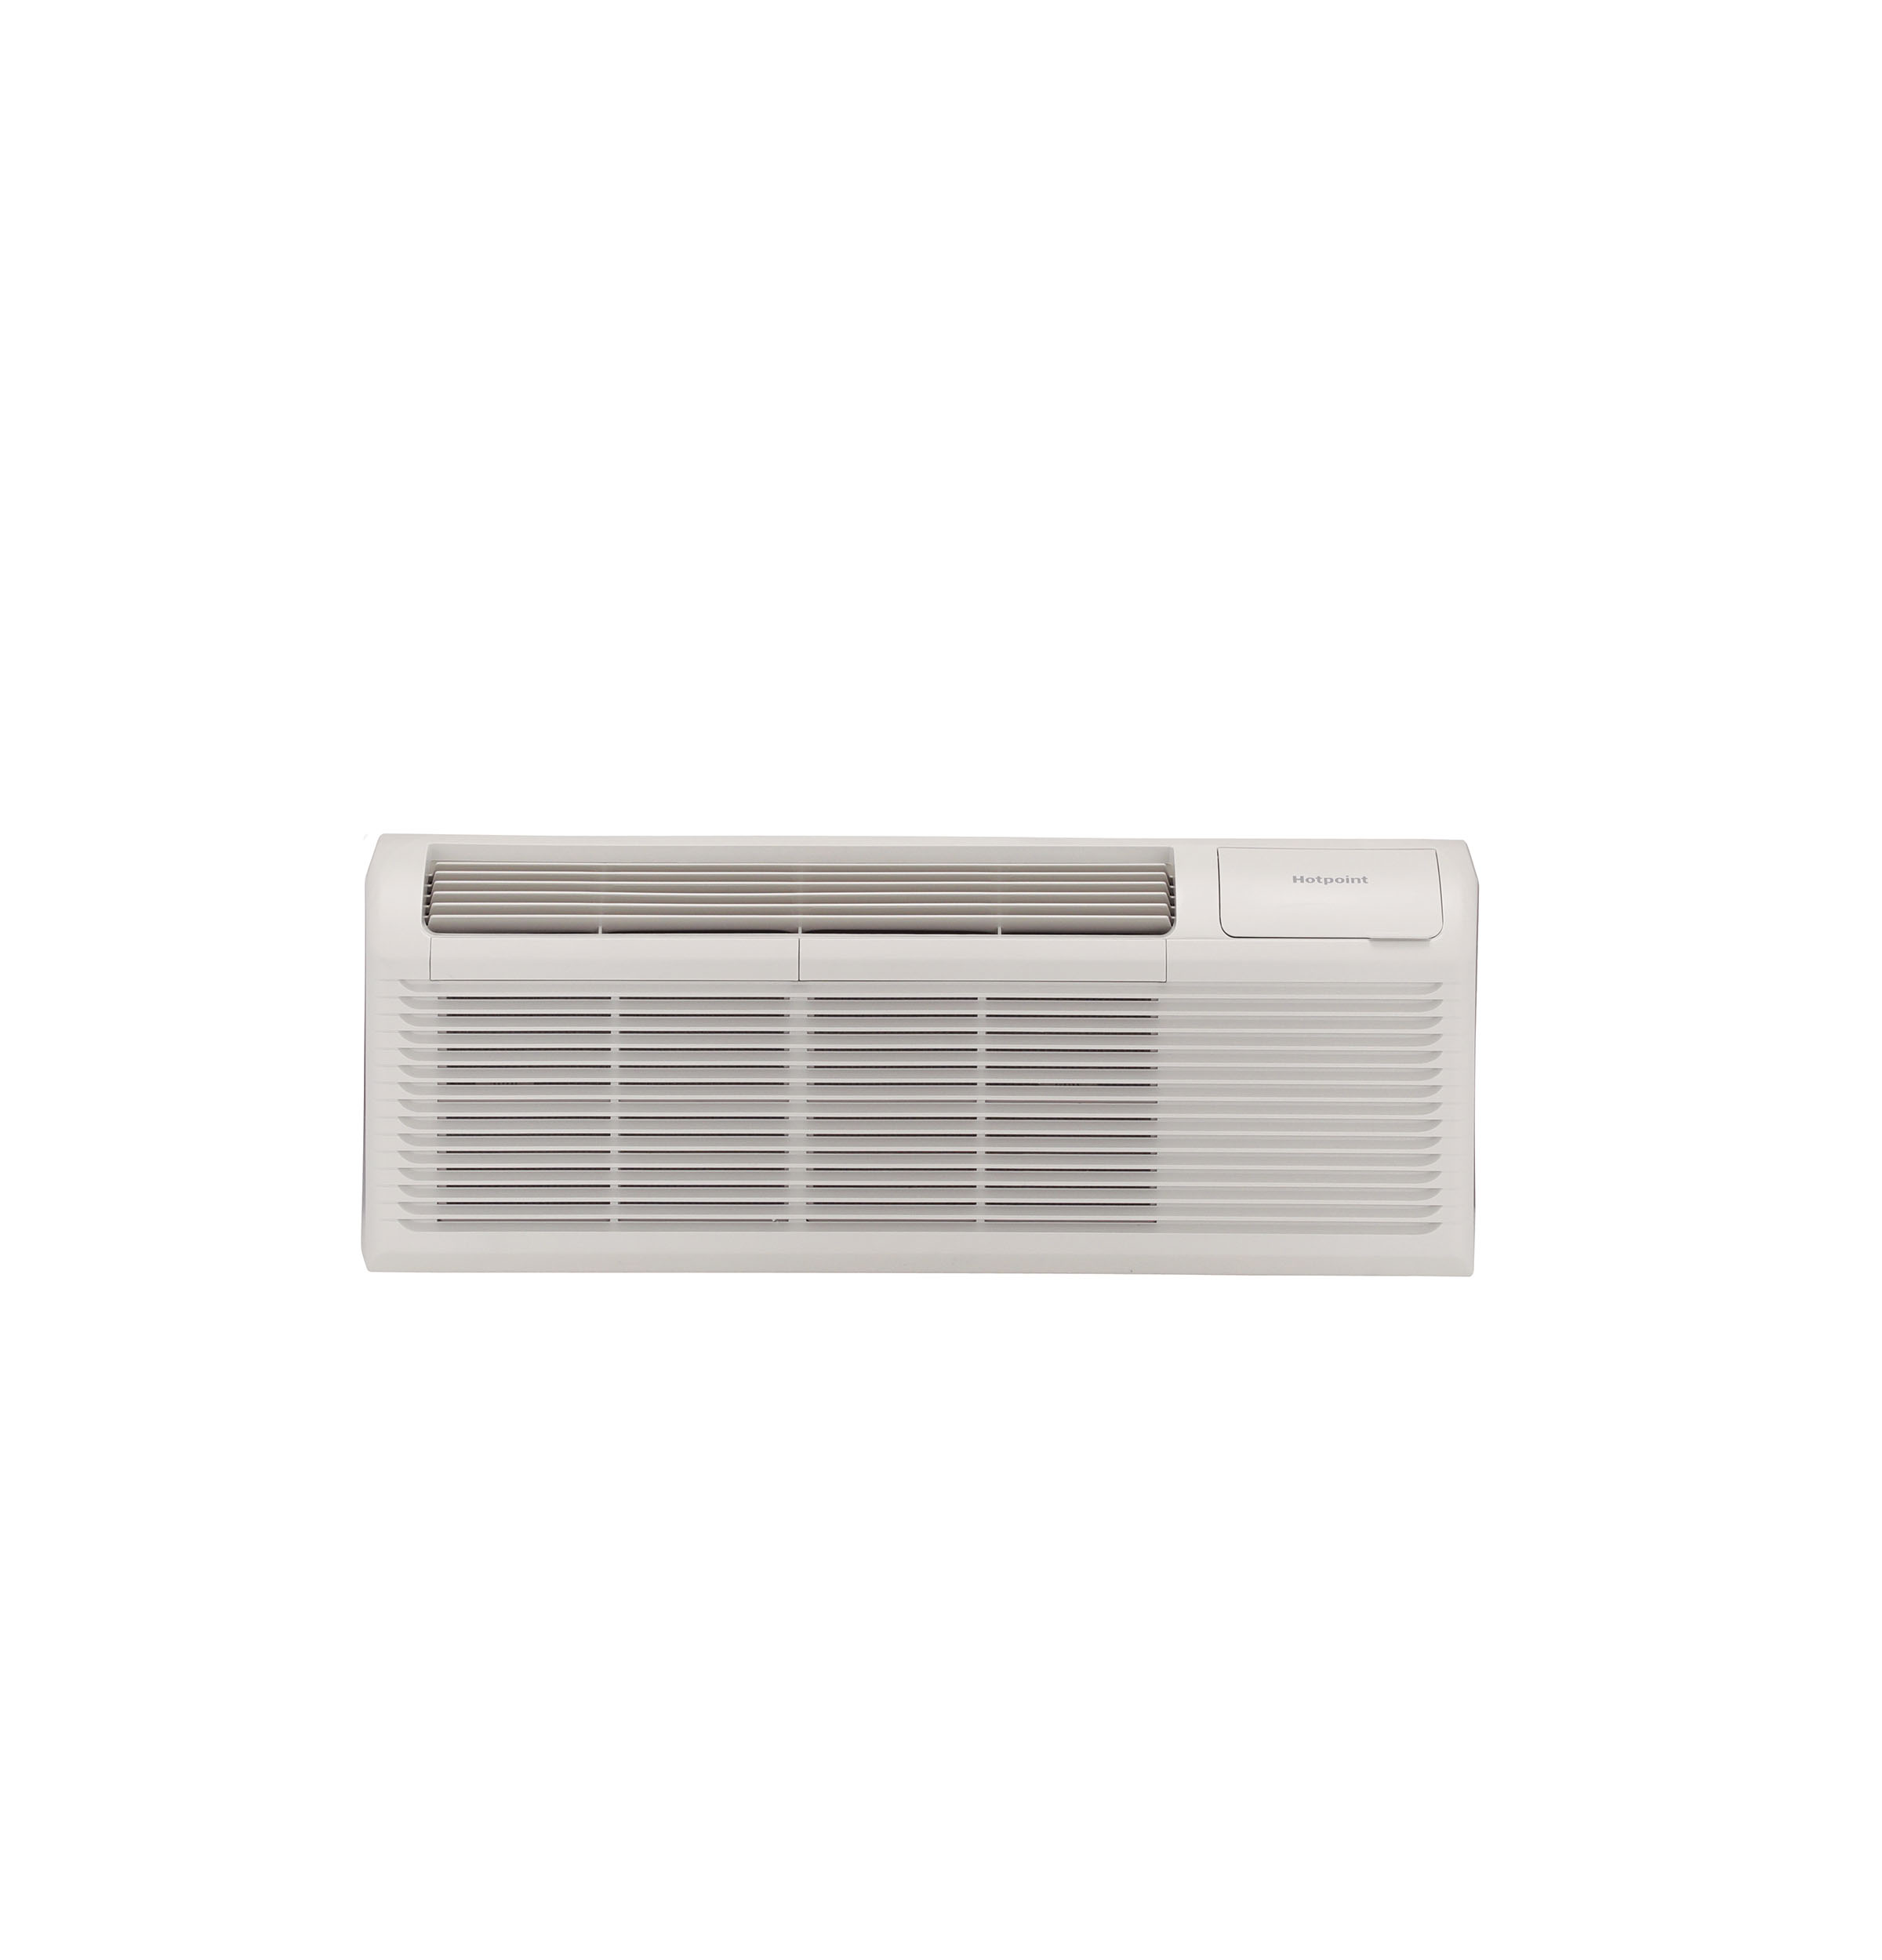 Hotpoint® PTAC with Electric Heat 9,000 BTU,15 amps, 230/208 Volt